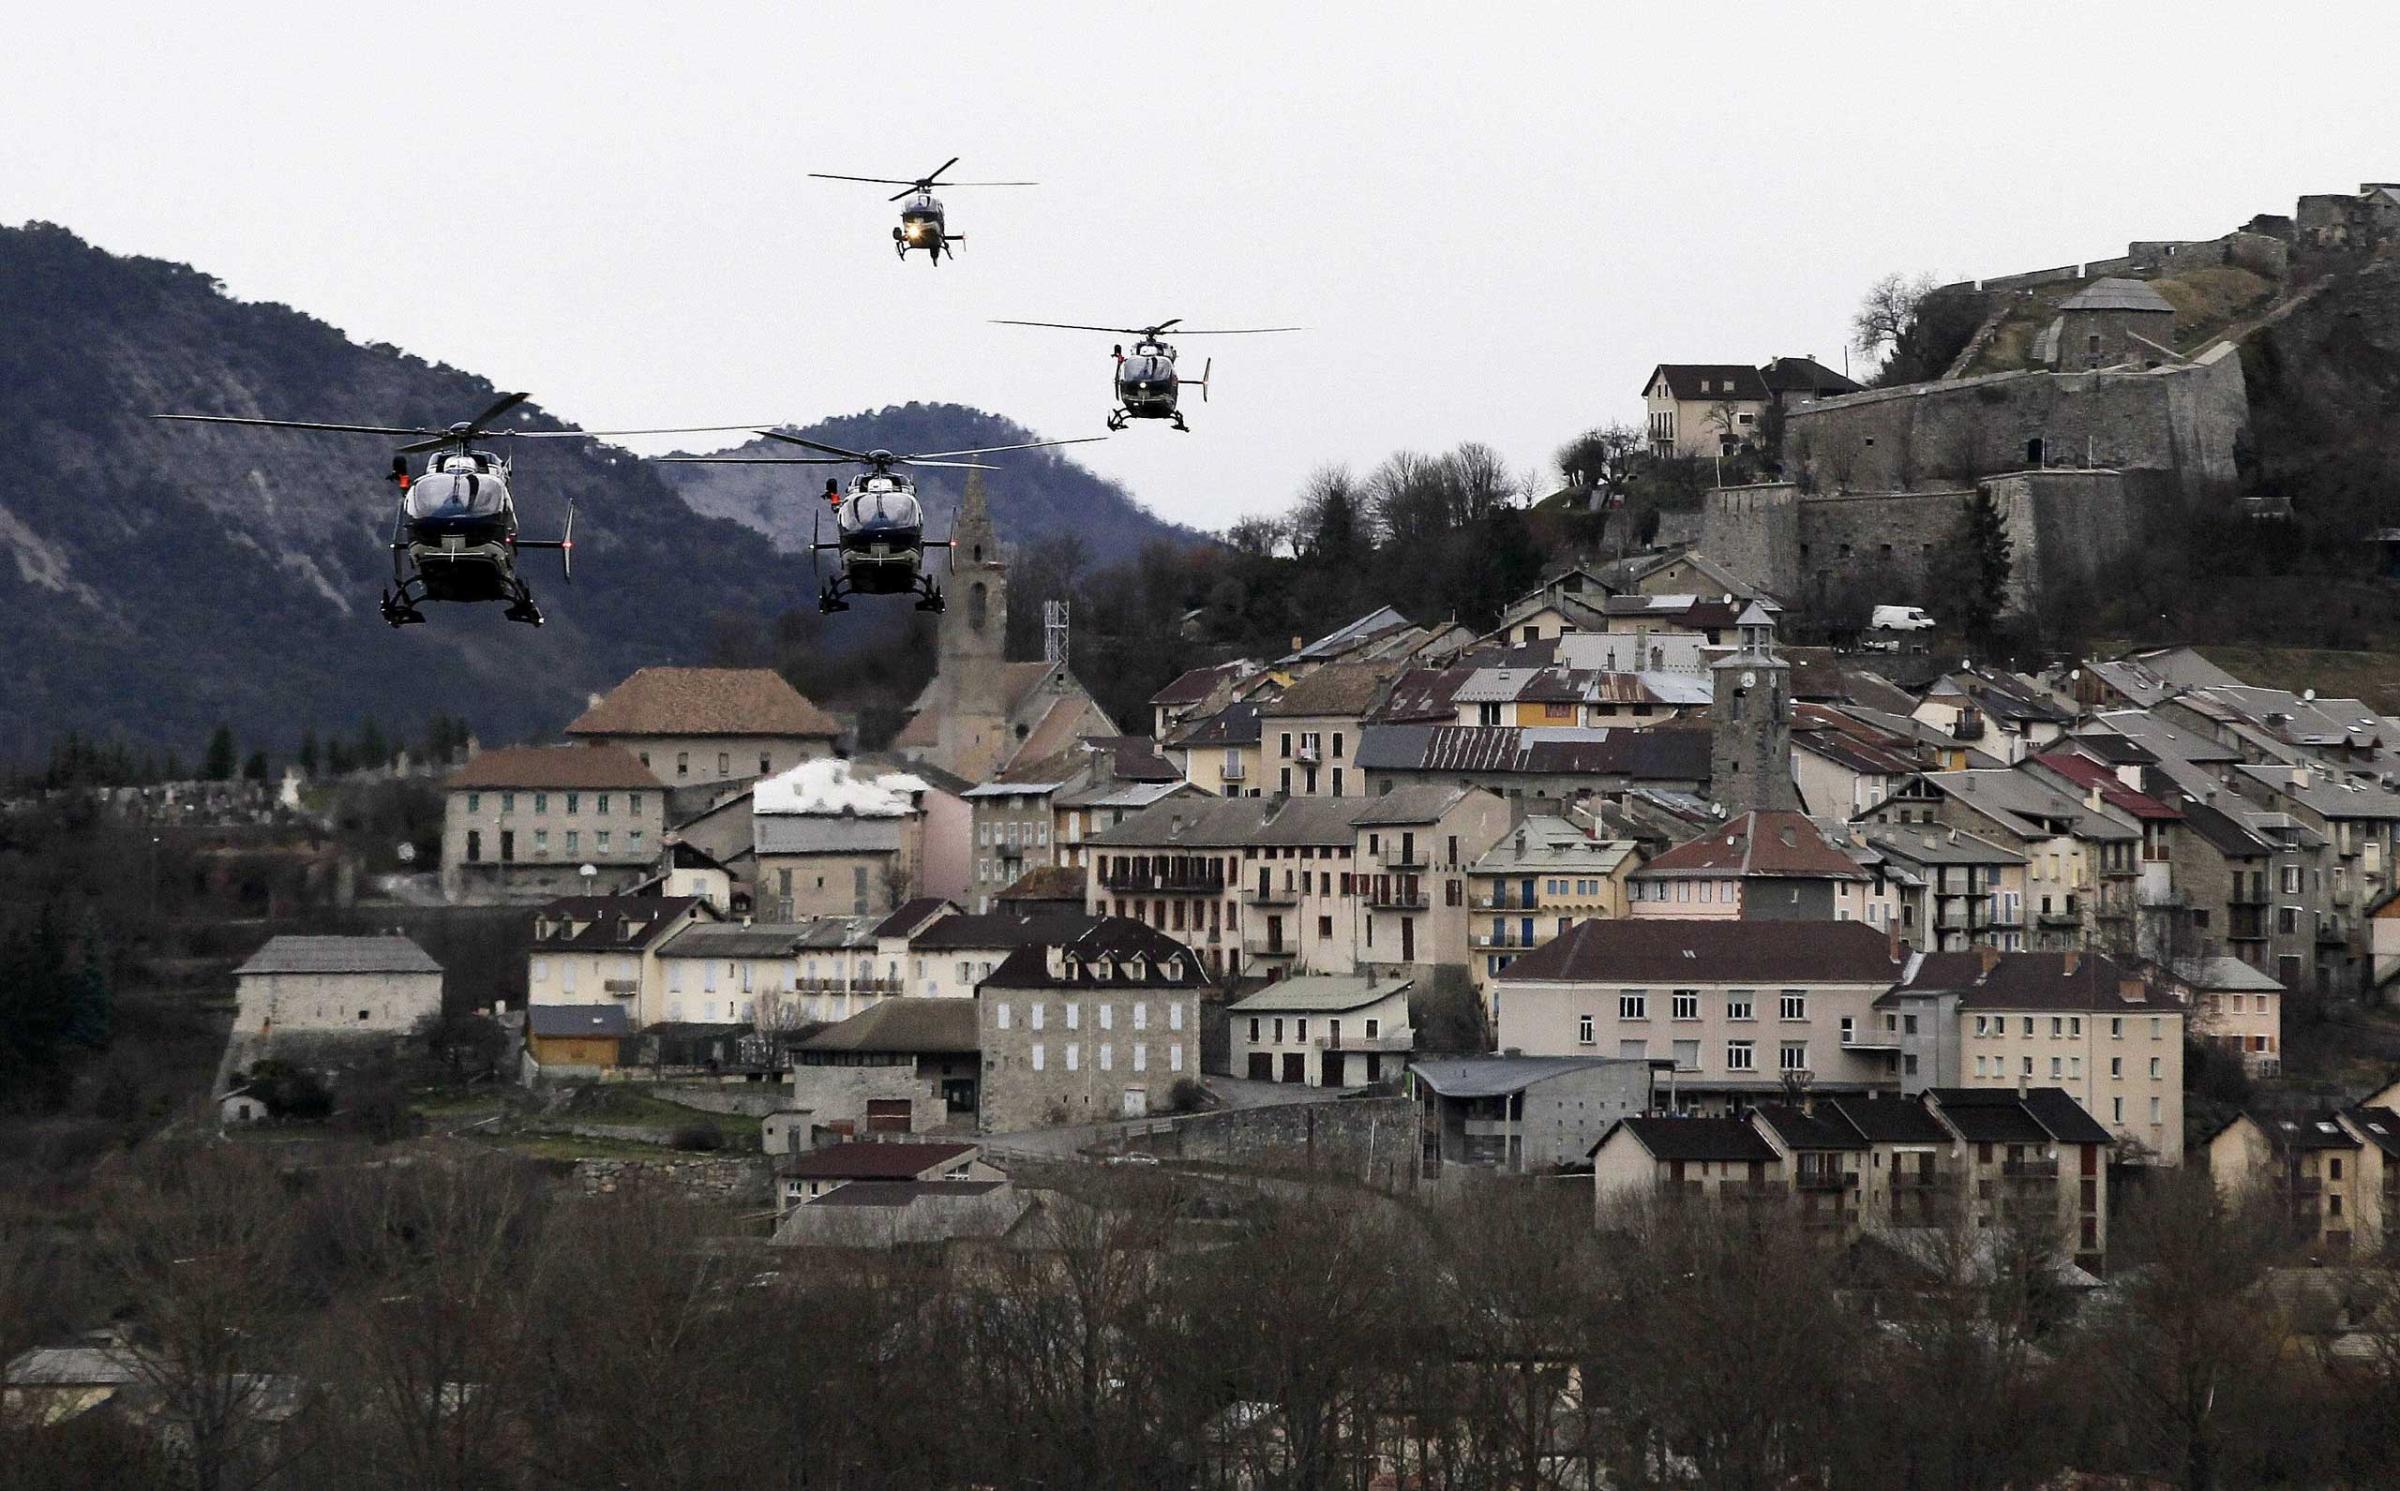 Helicopters of the French gendarmerie and emergency services fly over Seyne-les-Alpes as they resume works to recover the bodies and the remains of the Airbus A320 that crashed the previous day in the Alps, March 25, 2015.